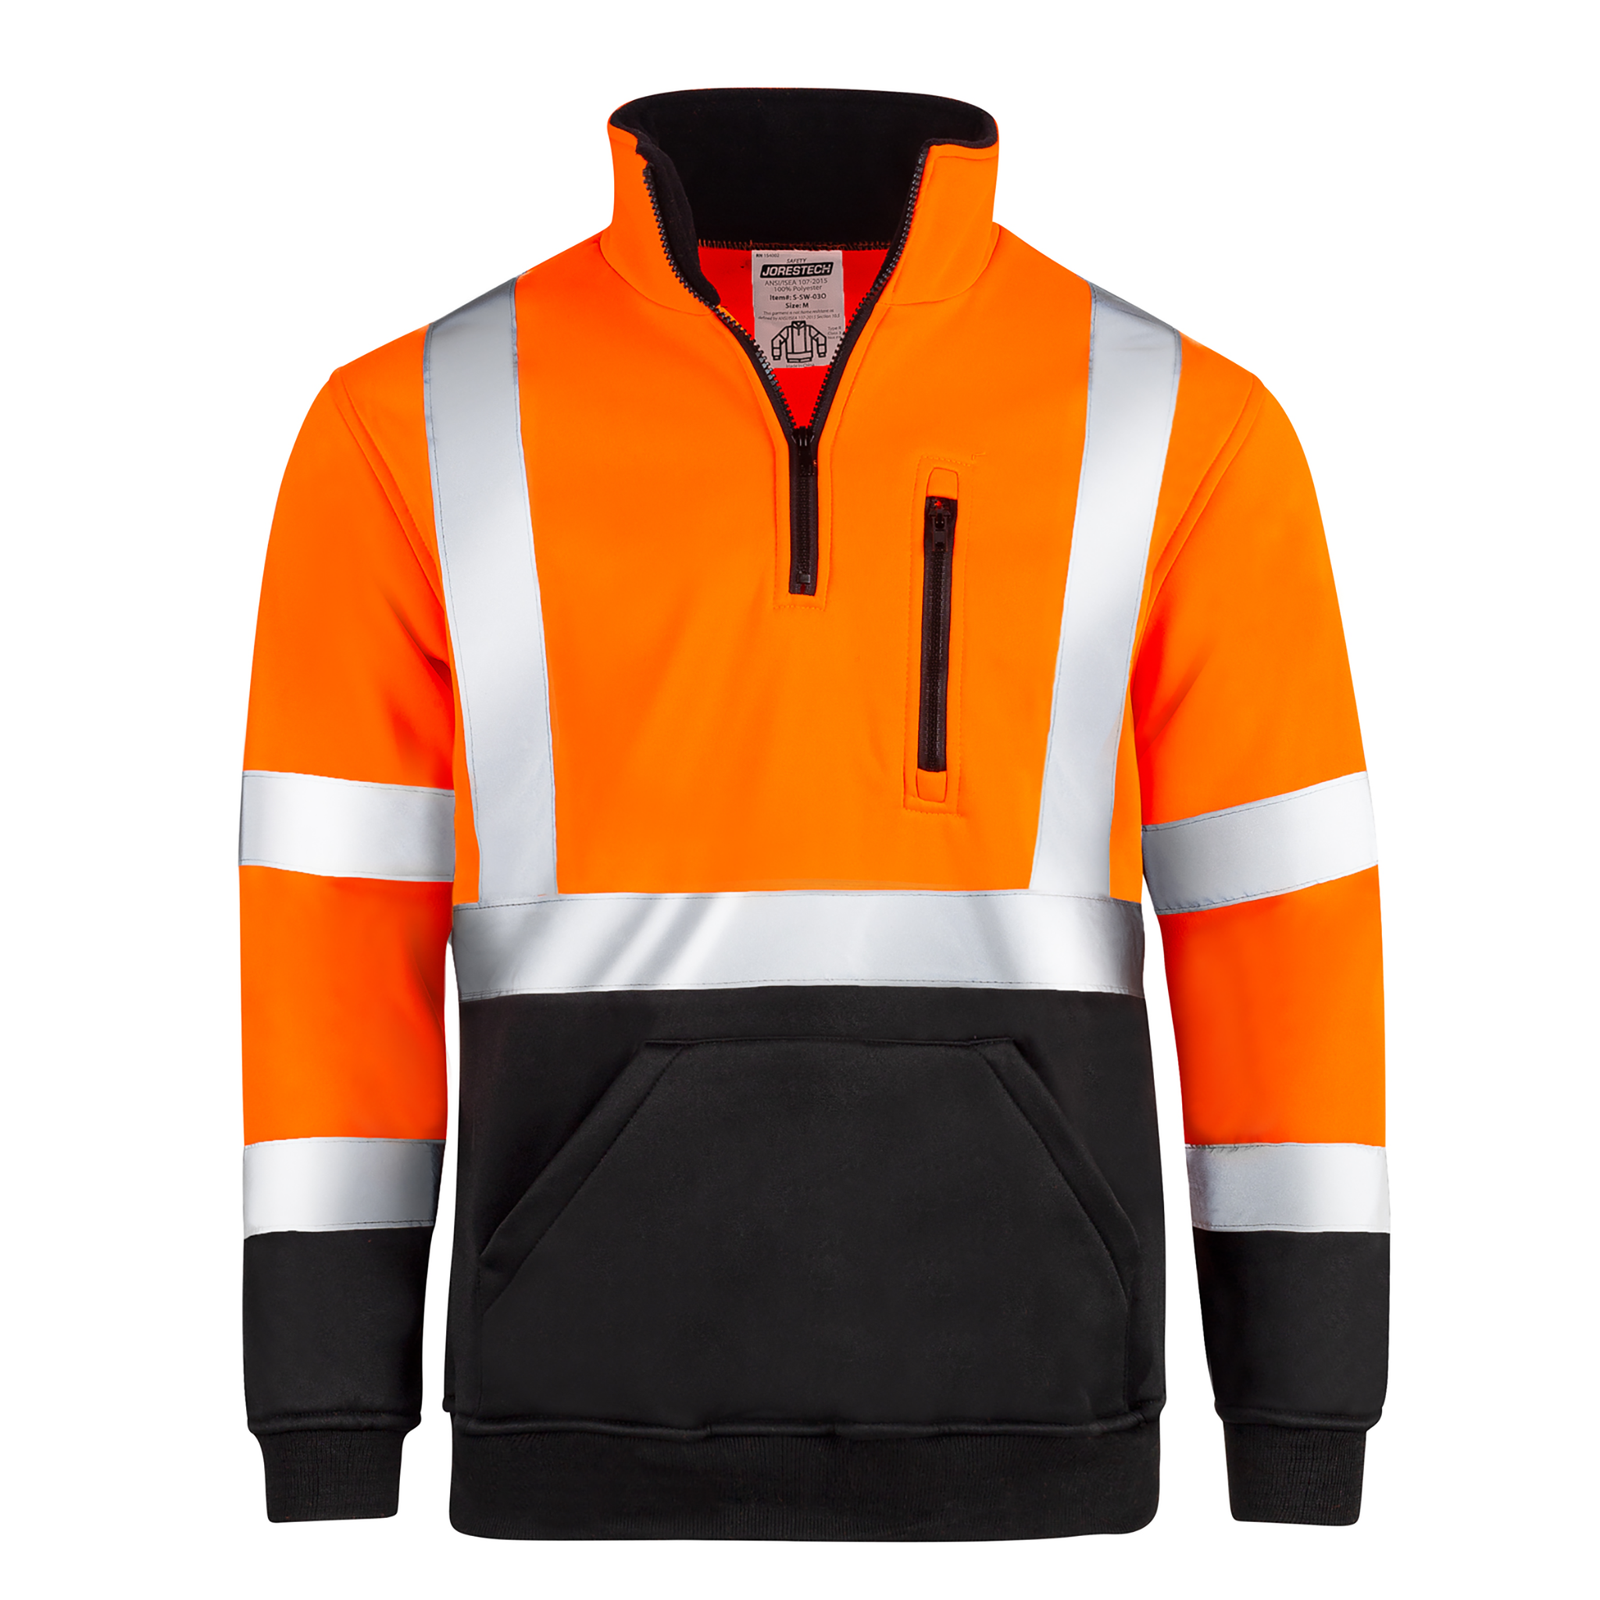 Orange high visibility safety sweater with 2